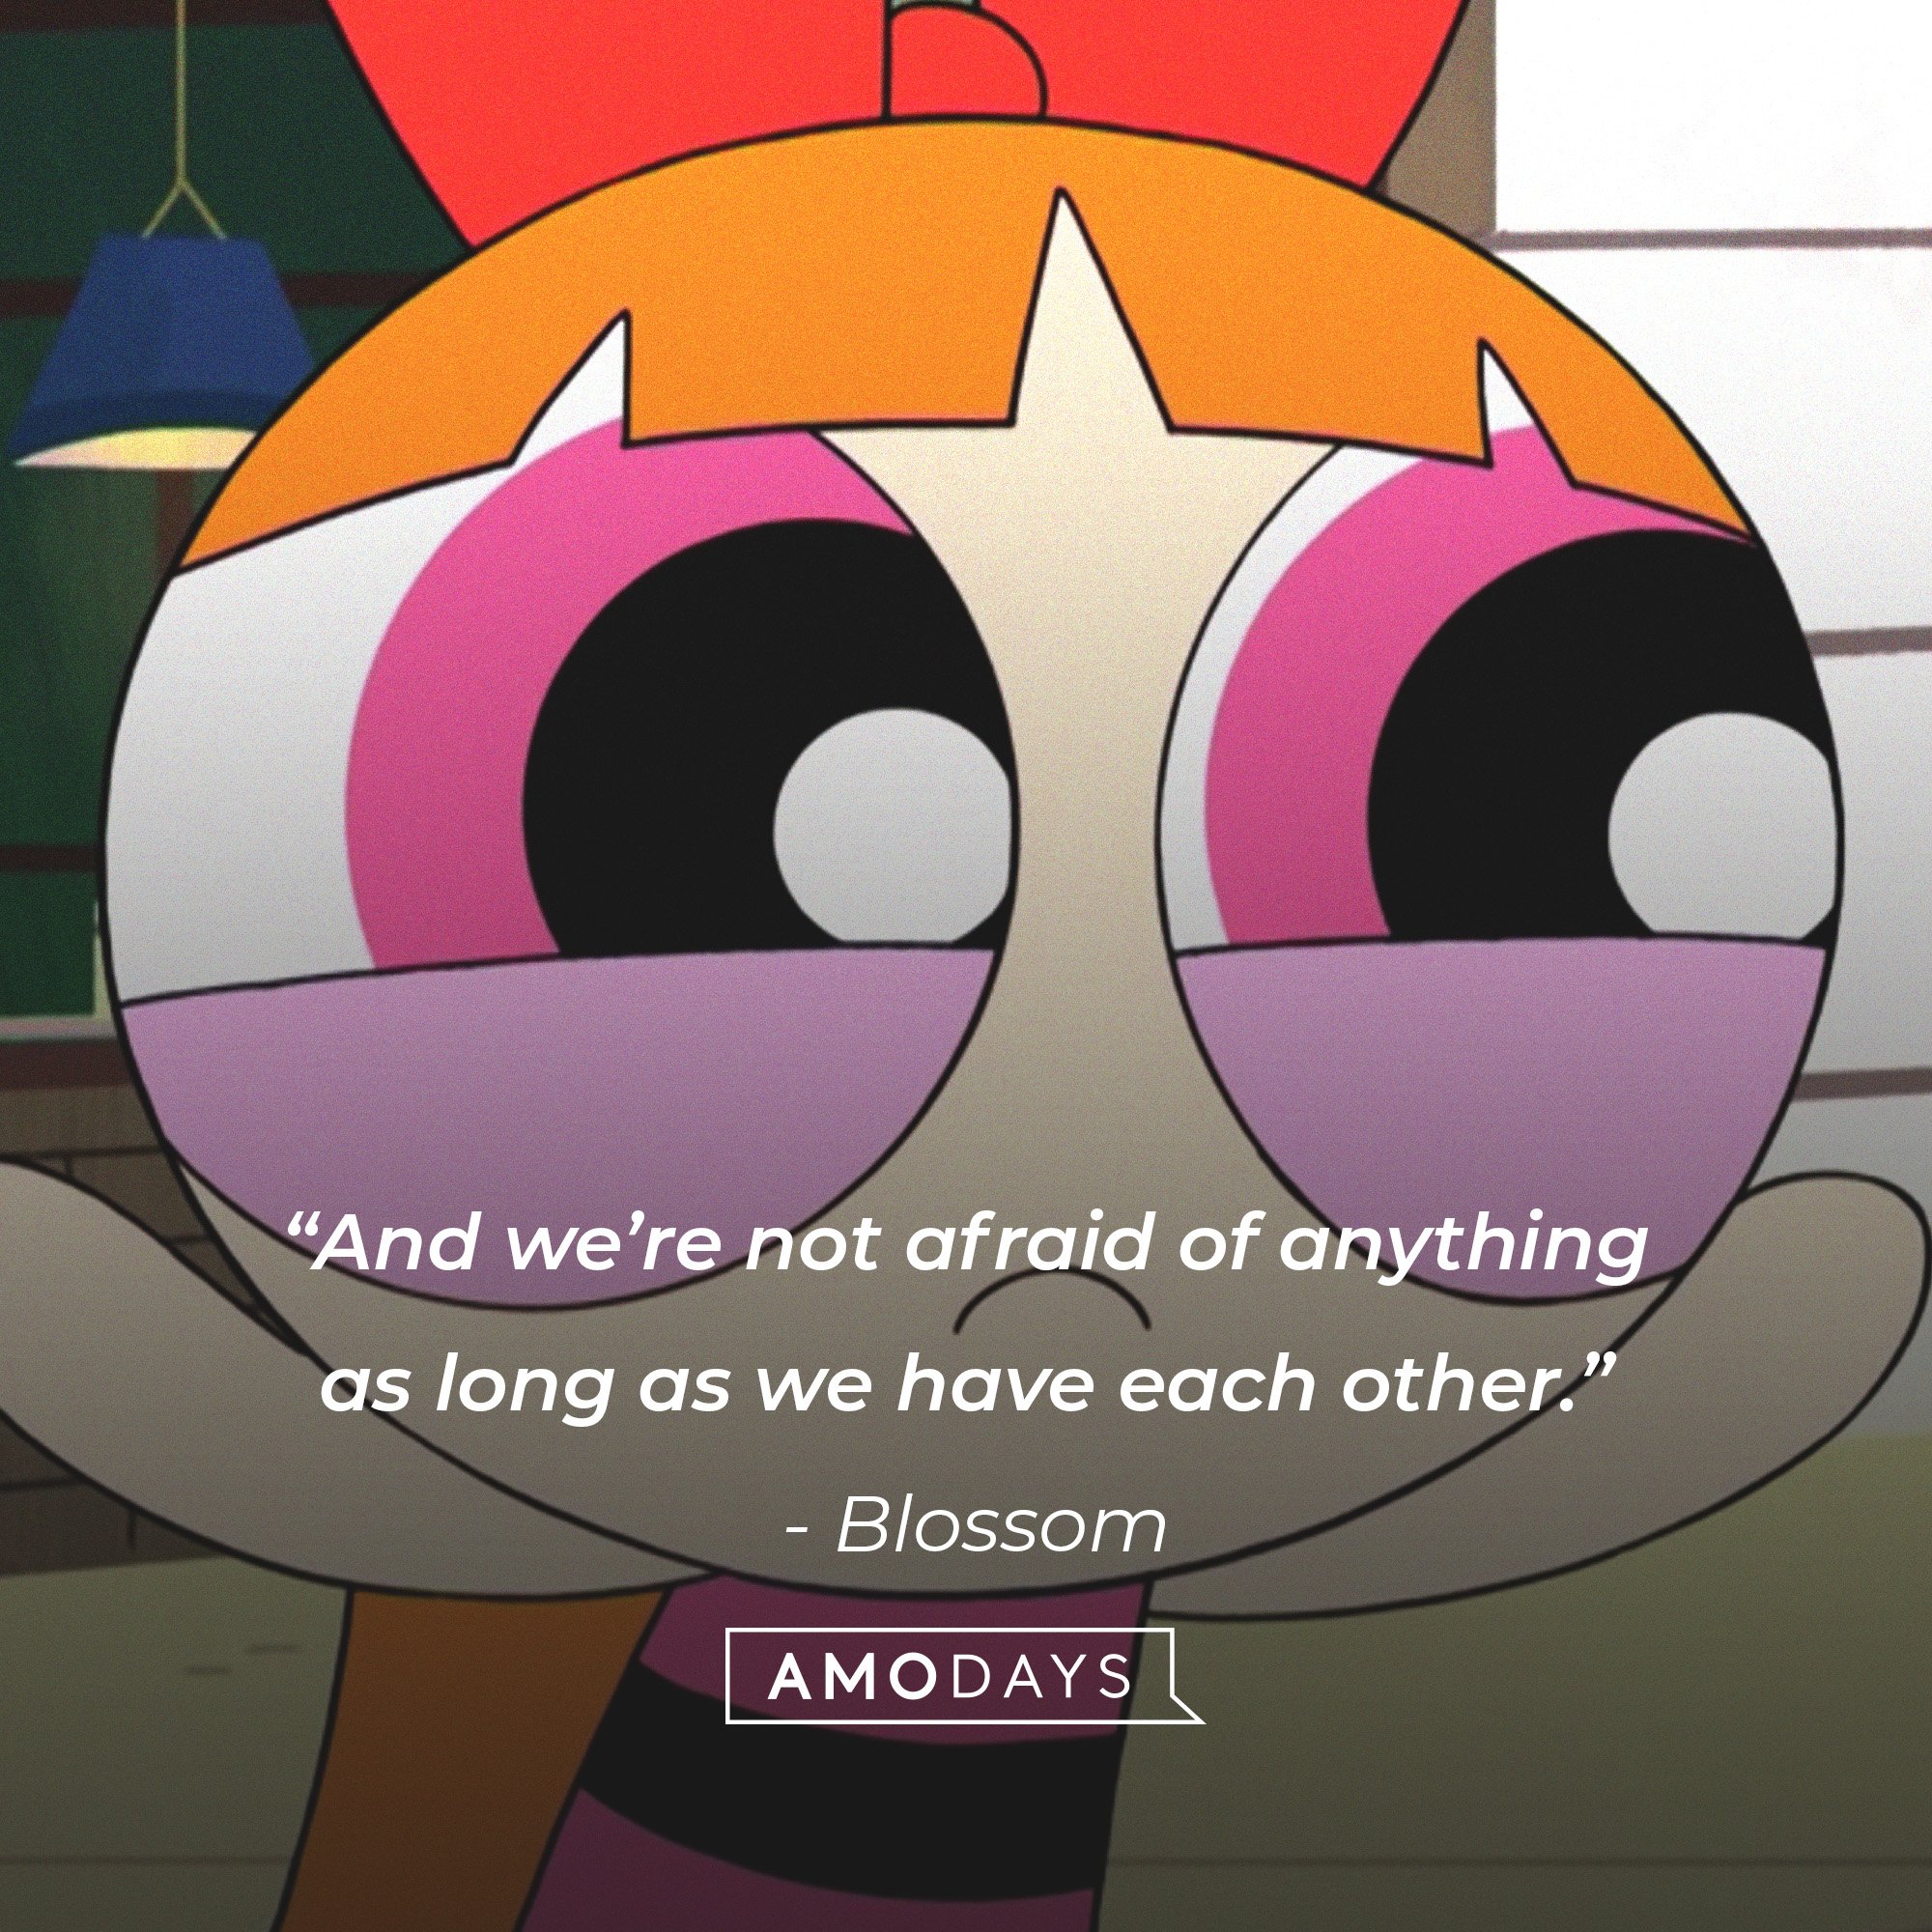 Blossom’s quote: “And we’re not afraid of anything as long as we have each other.”  | Image: AmoDays